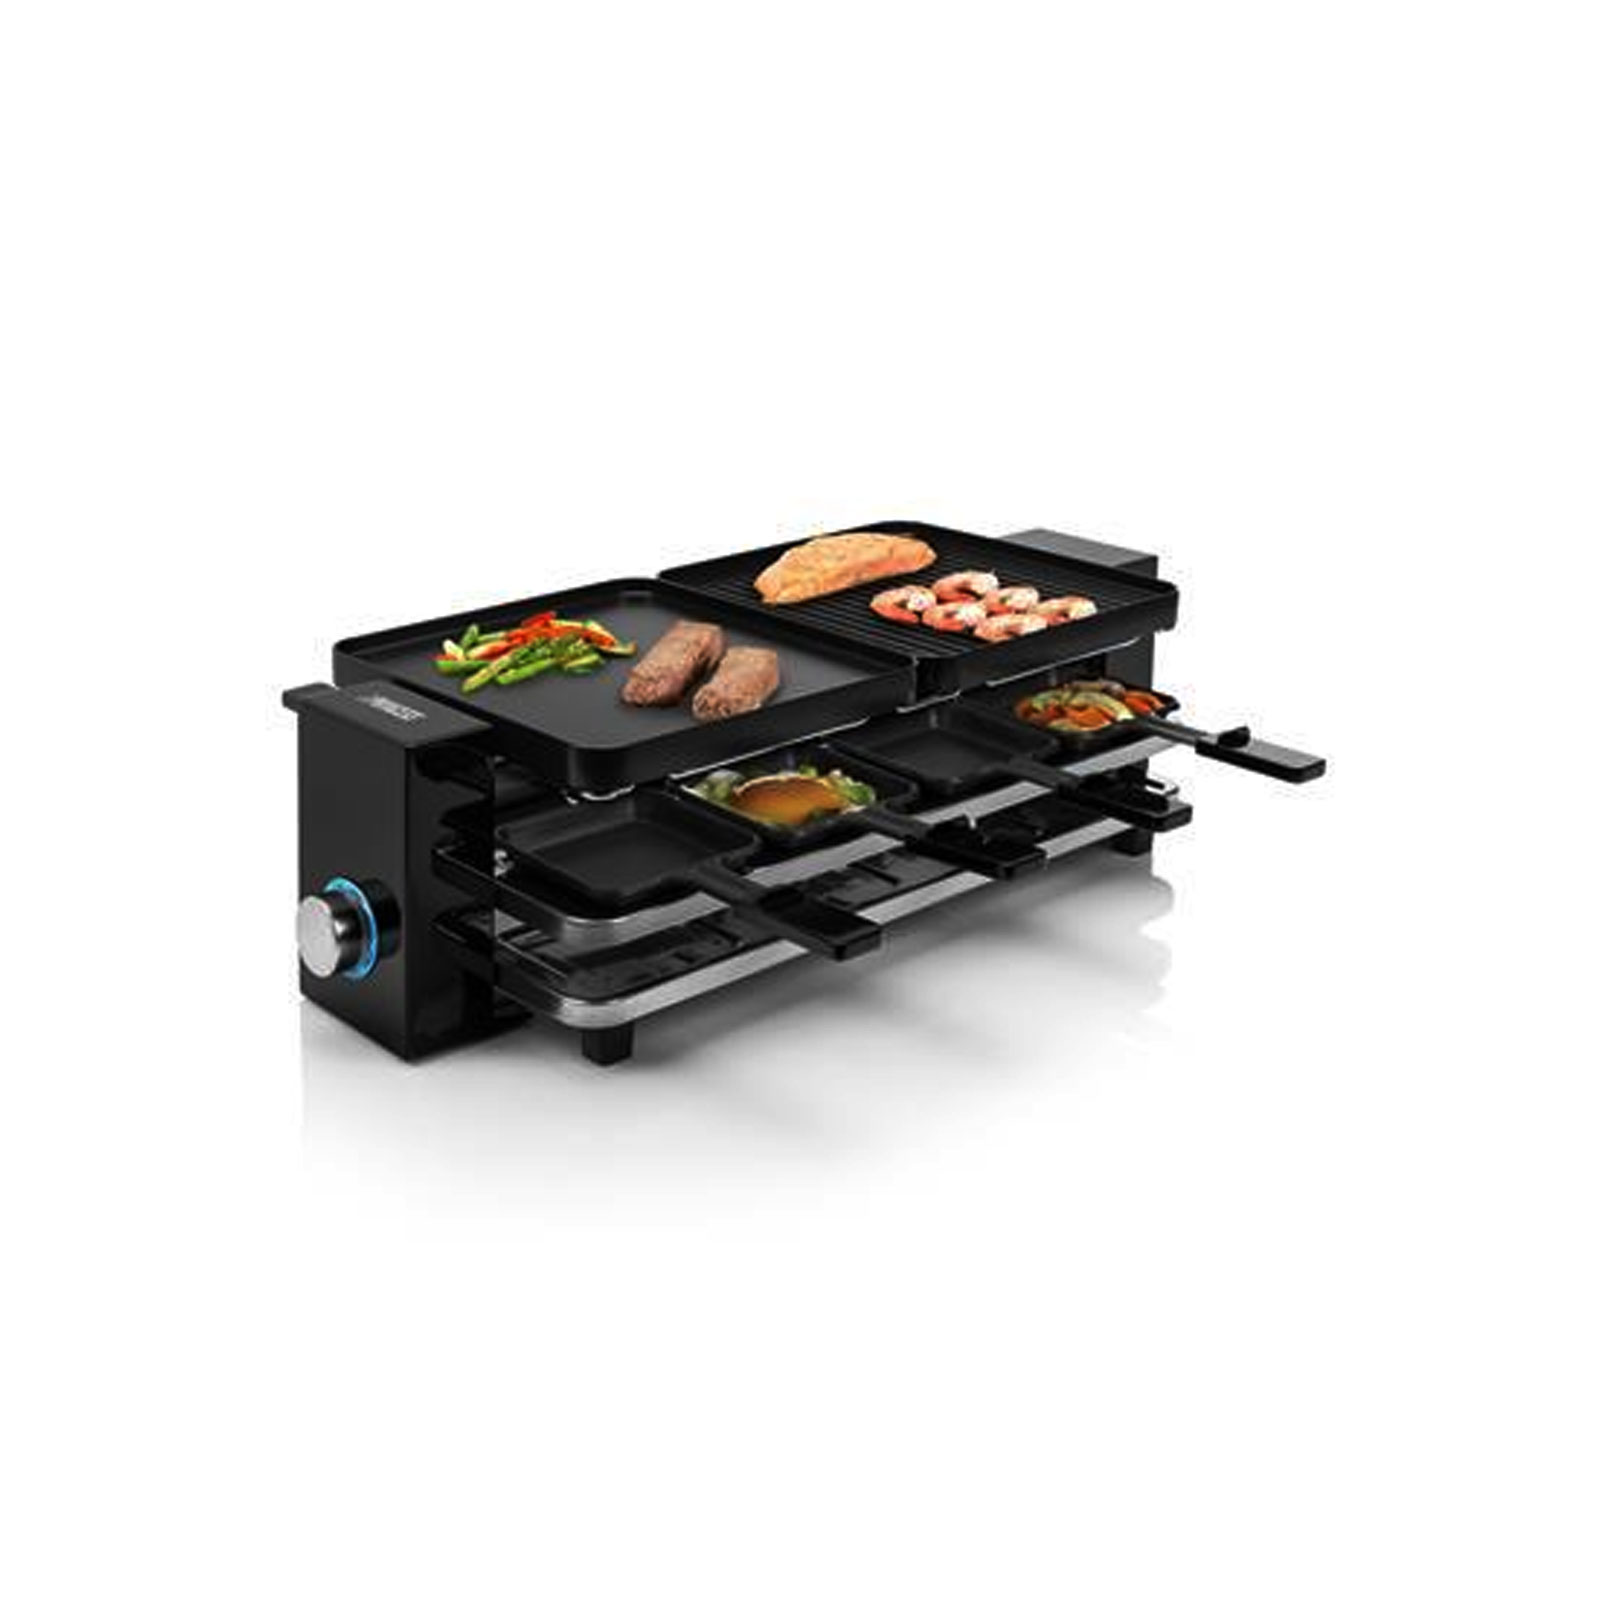 PRINCESS 162925 PIANO 8er Raclettegrill